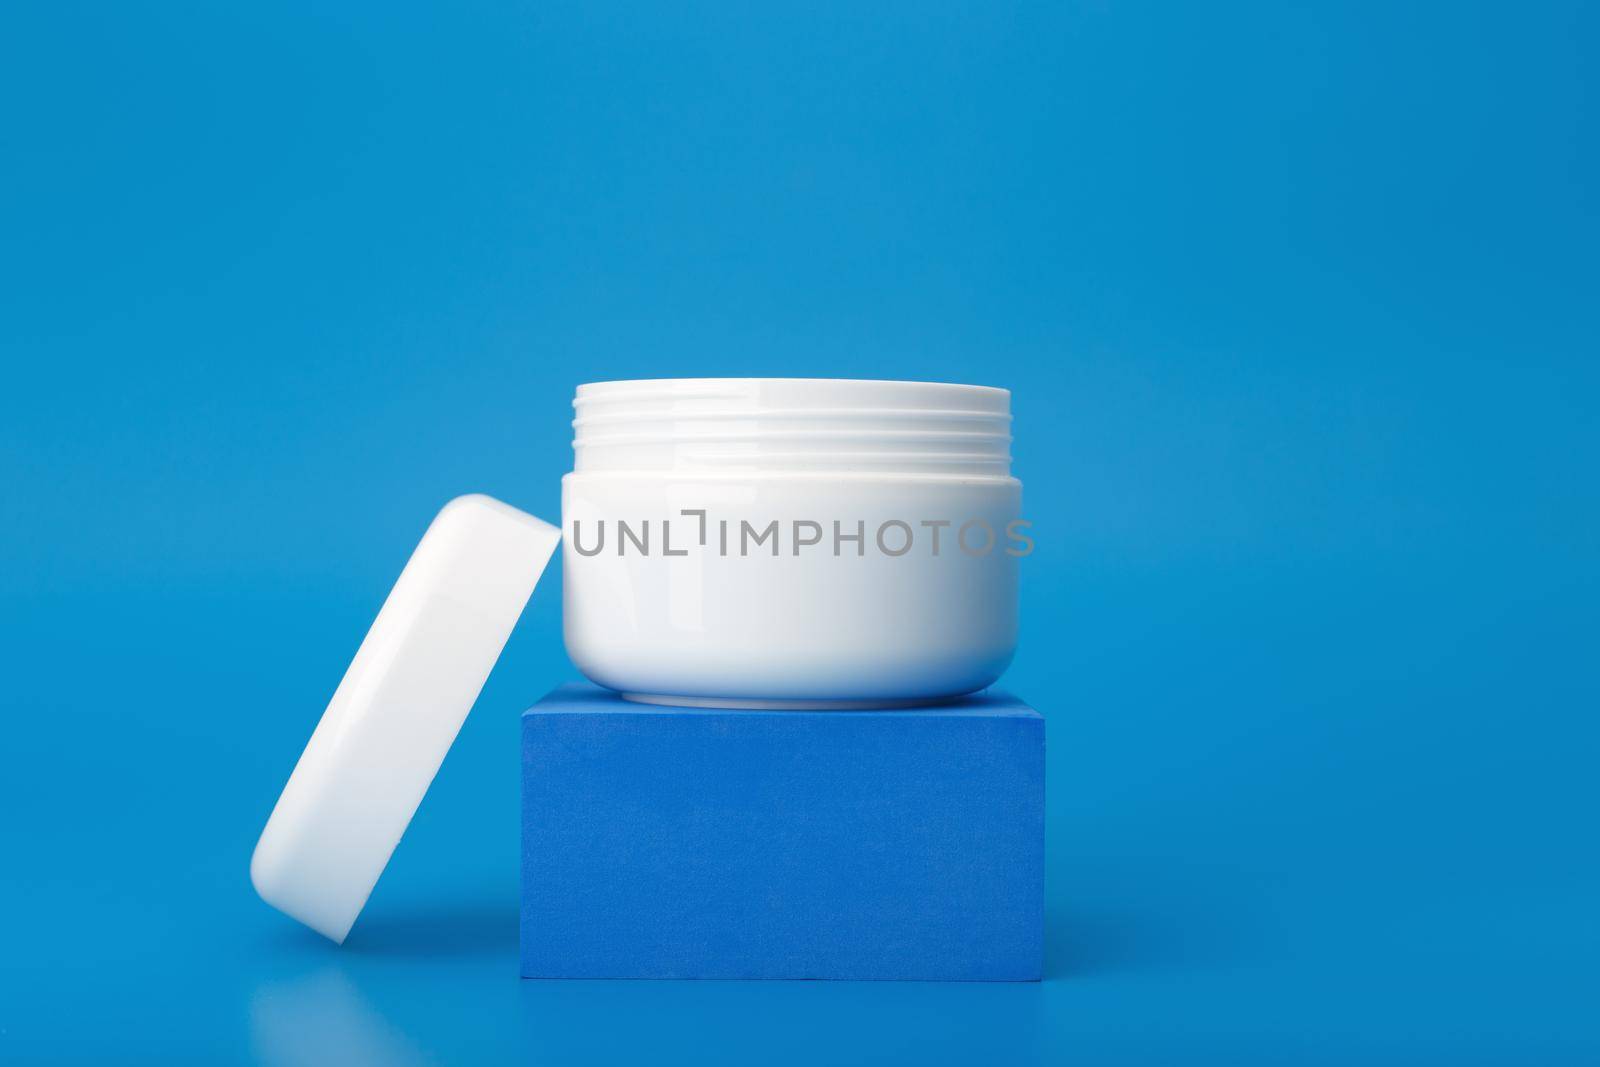 Minimal still life with white opened cosmetic jar on pedestal against dark blue background. Concept of repairing, moisturizing, anti aging nourishing night cream, gel, mask or lotion